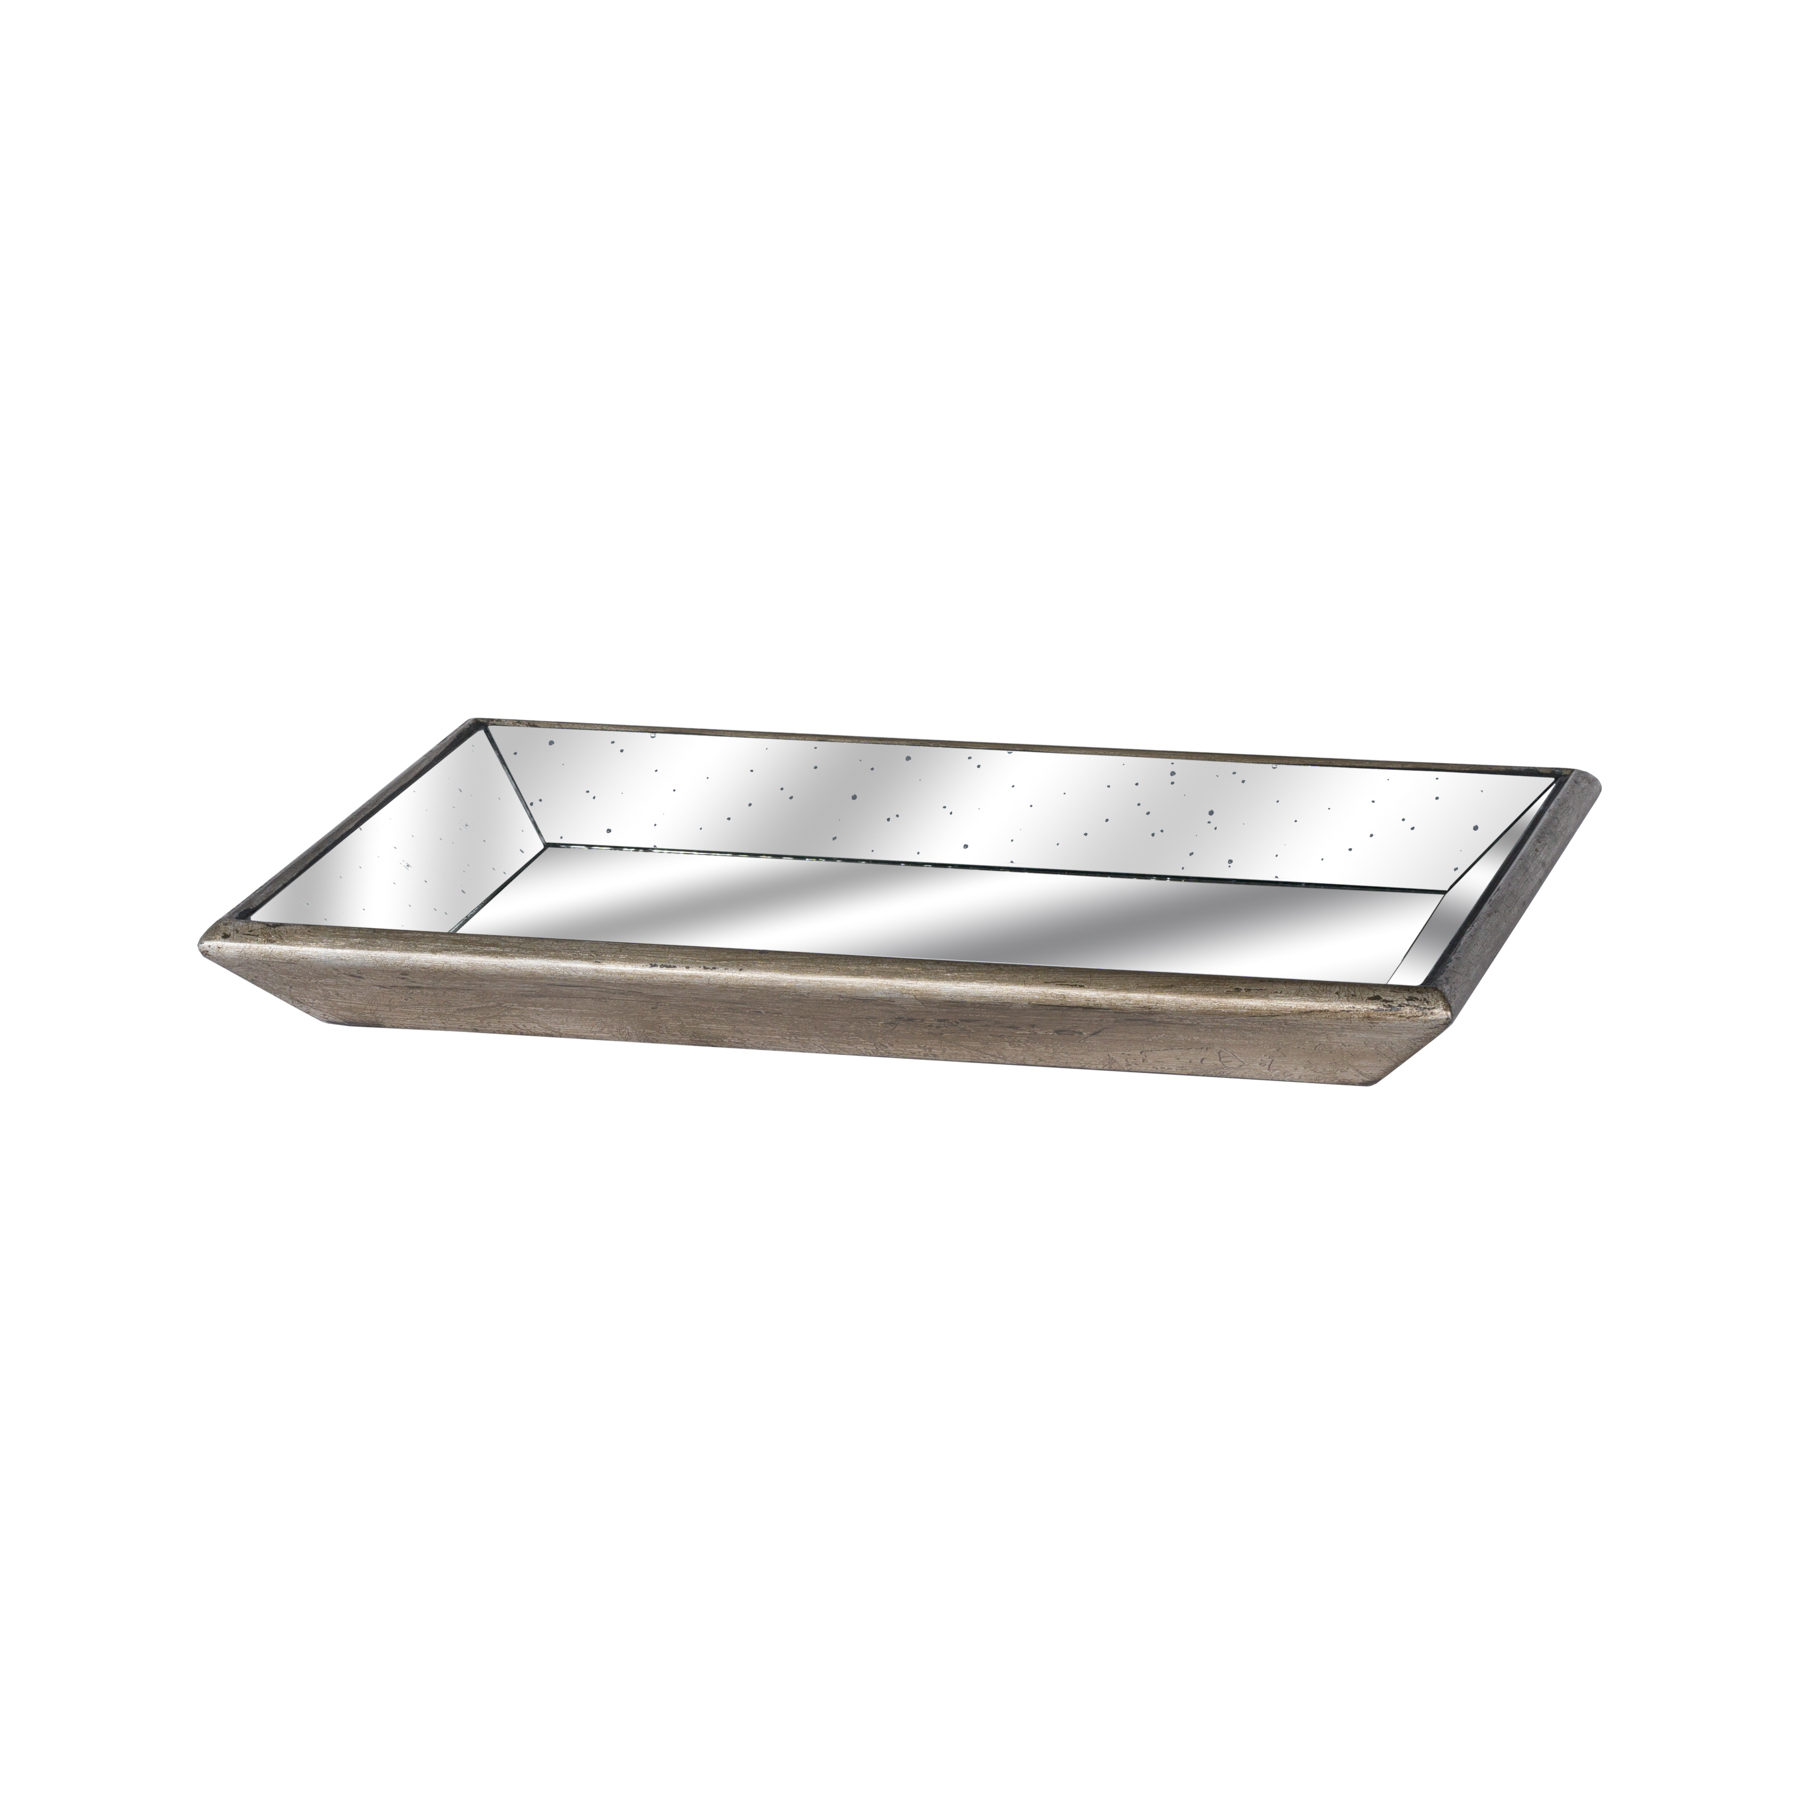 Astor Distressed Mirrored Tray With Wooden Detailing